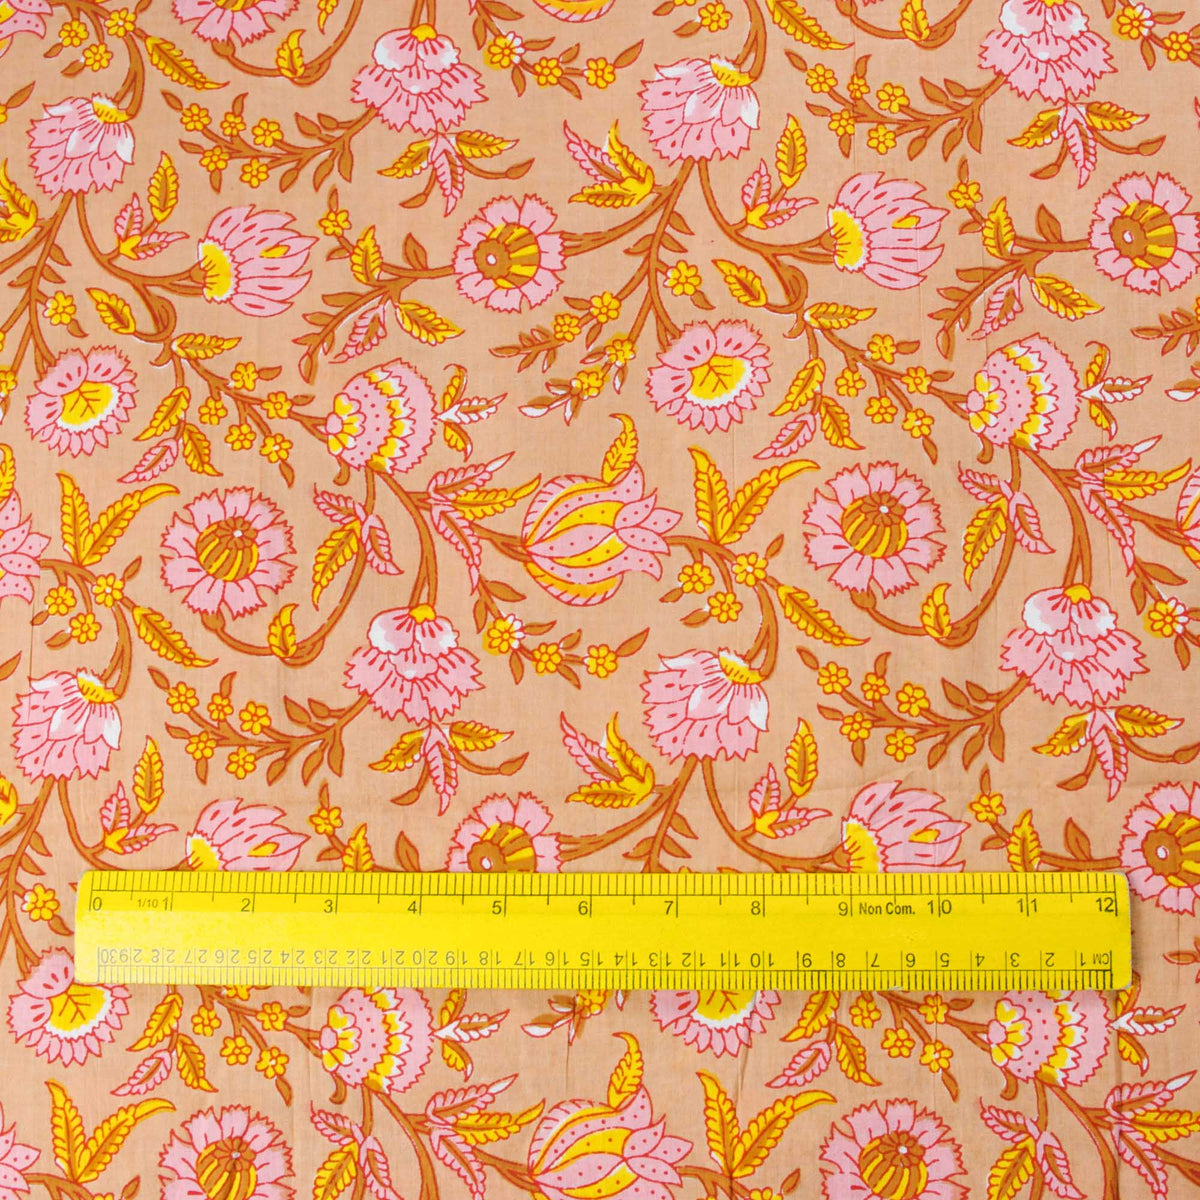 Hand Screen Printed 100% Cotton Fabric - Pink & Yellow Flowers (Design 380)